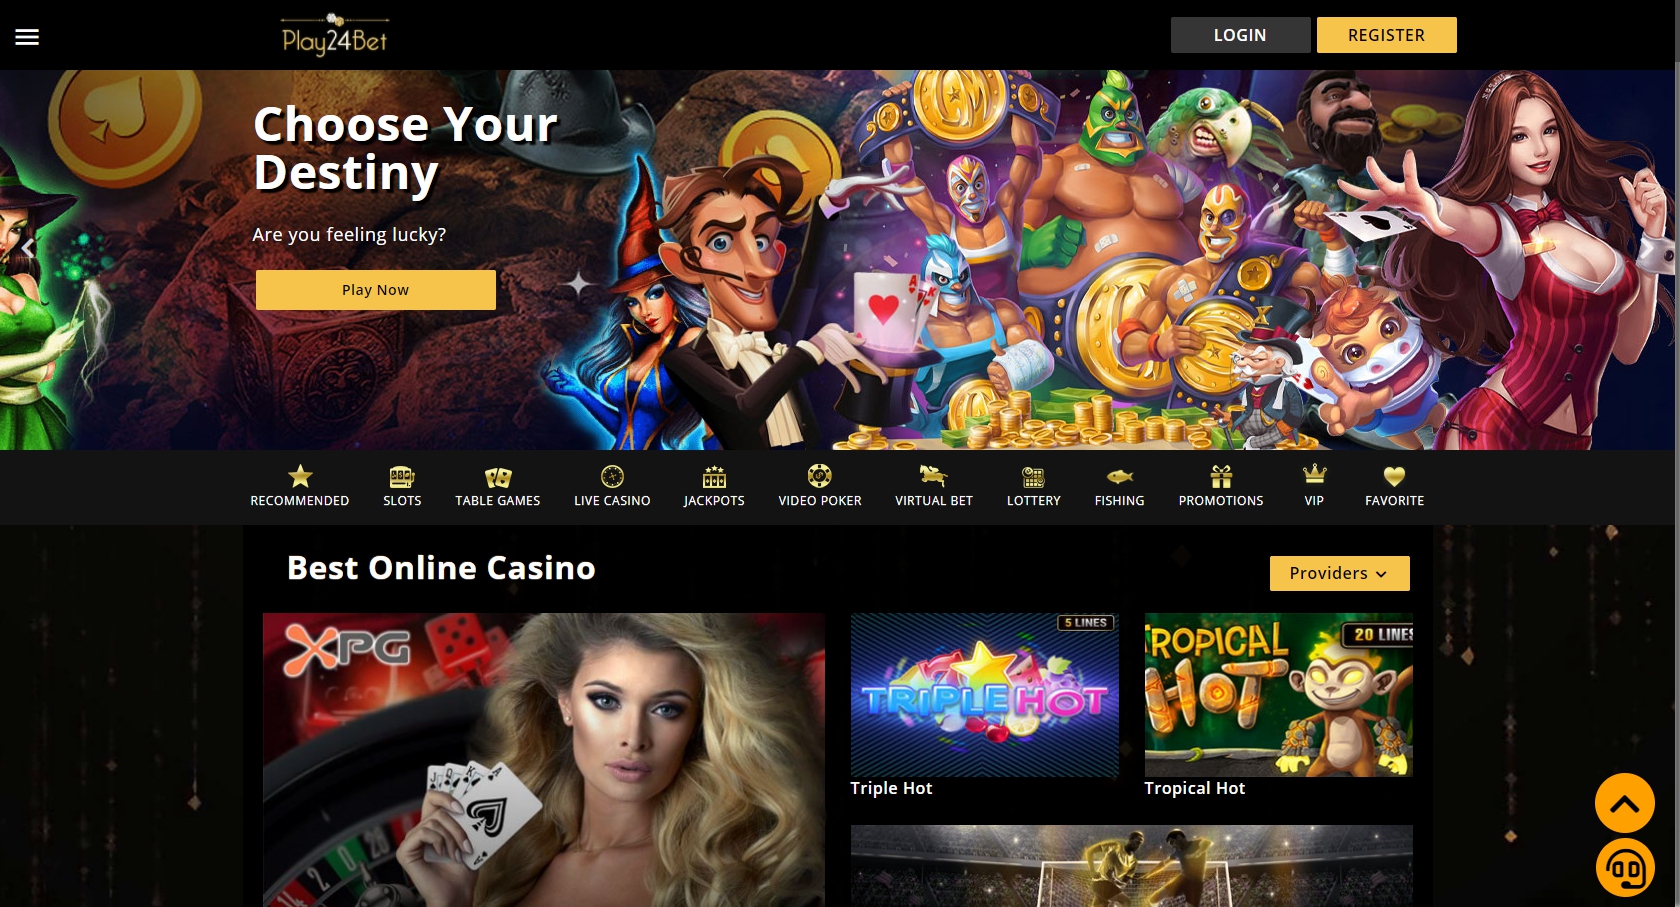 Play 24 Bet Casino Review